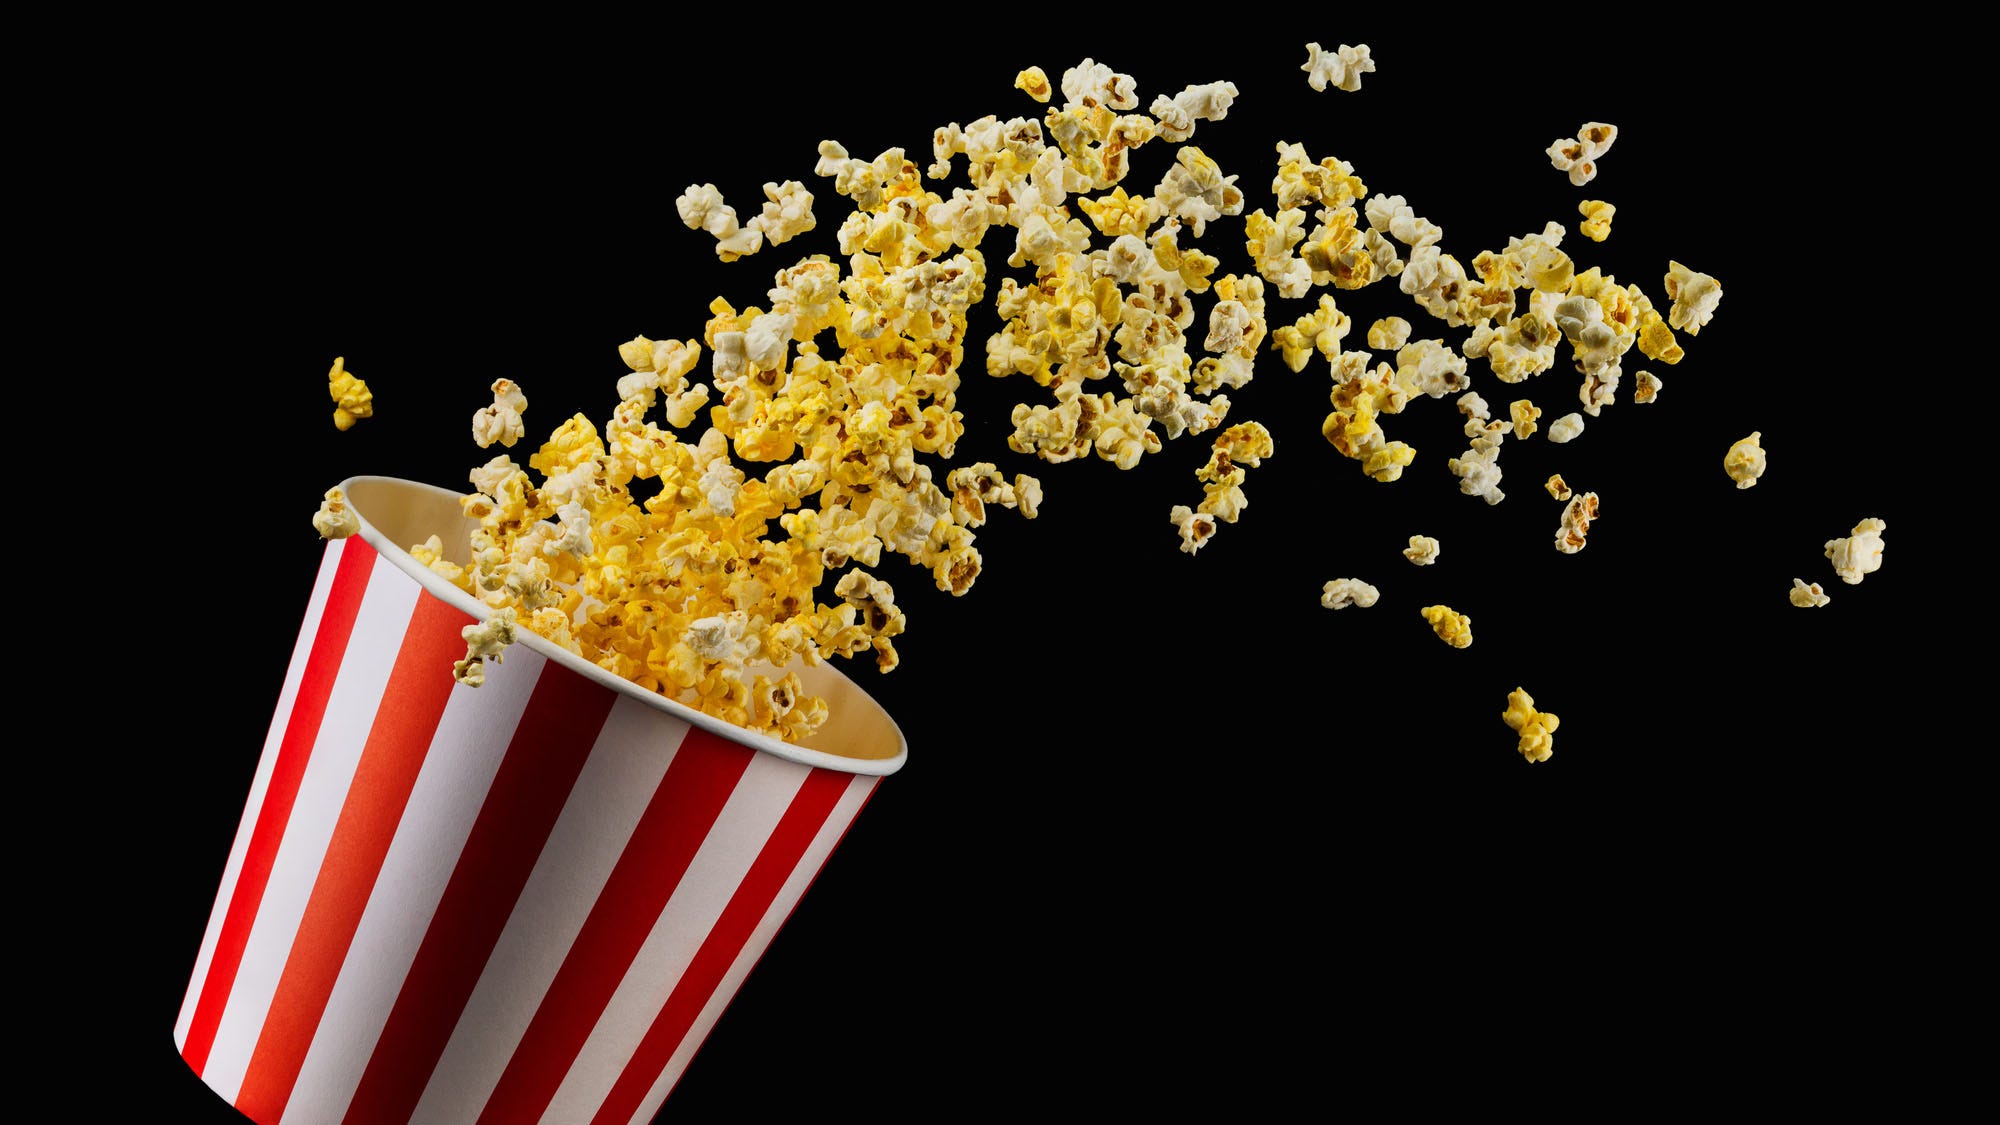 What's the Future of Popcorn?